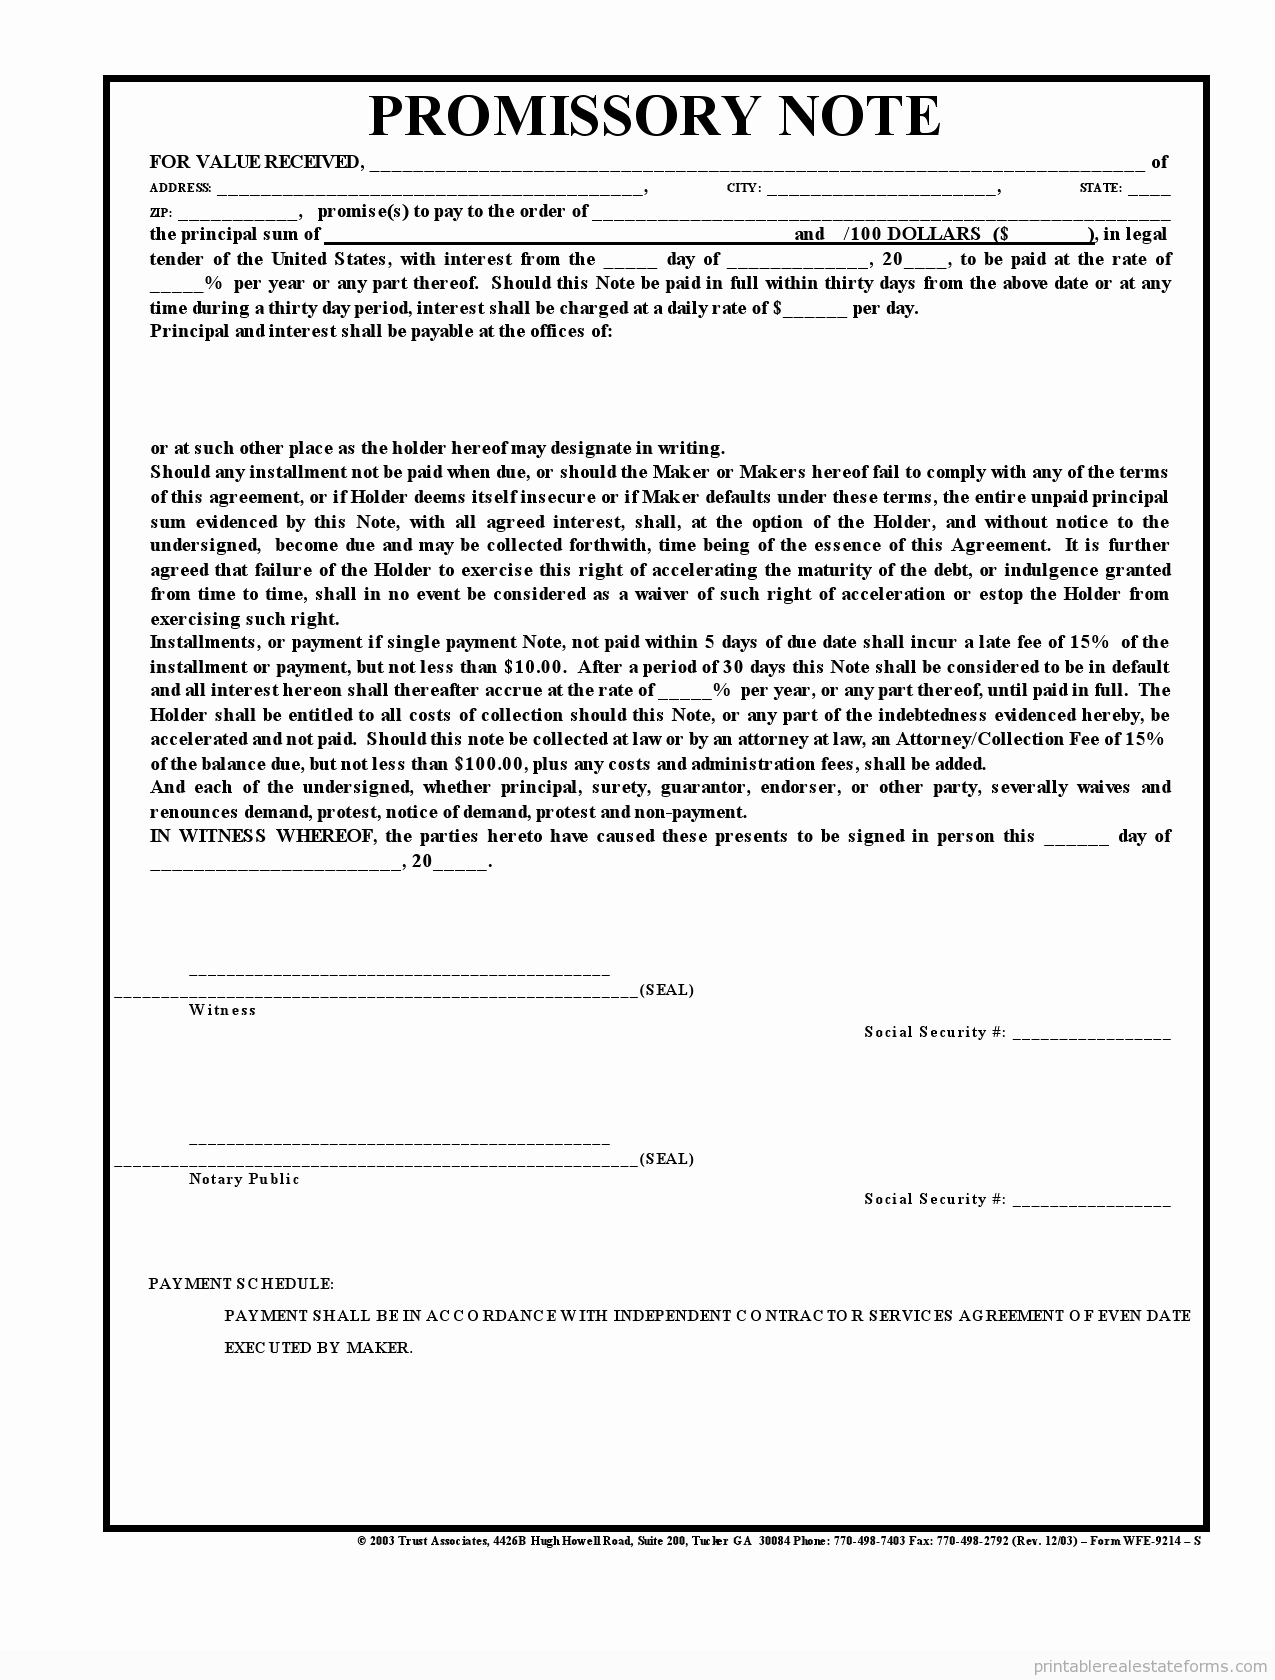 Free Printable Promissory Note Fresh Promissory Note0001 Printable Real Estate forms